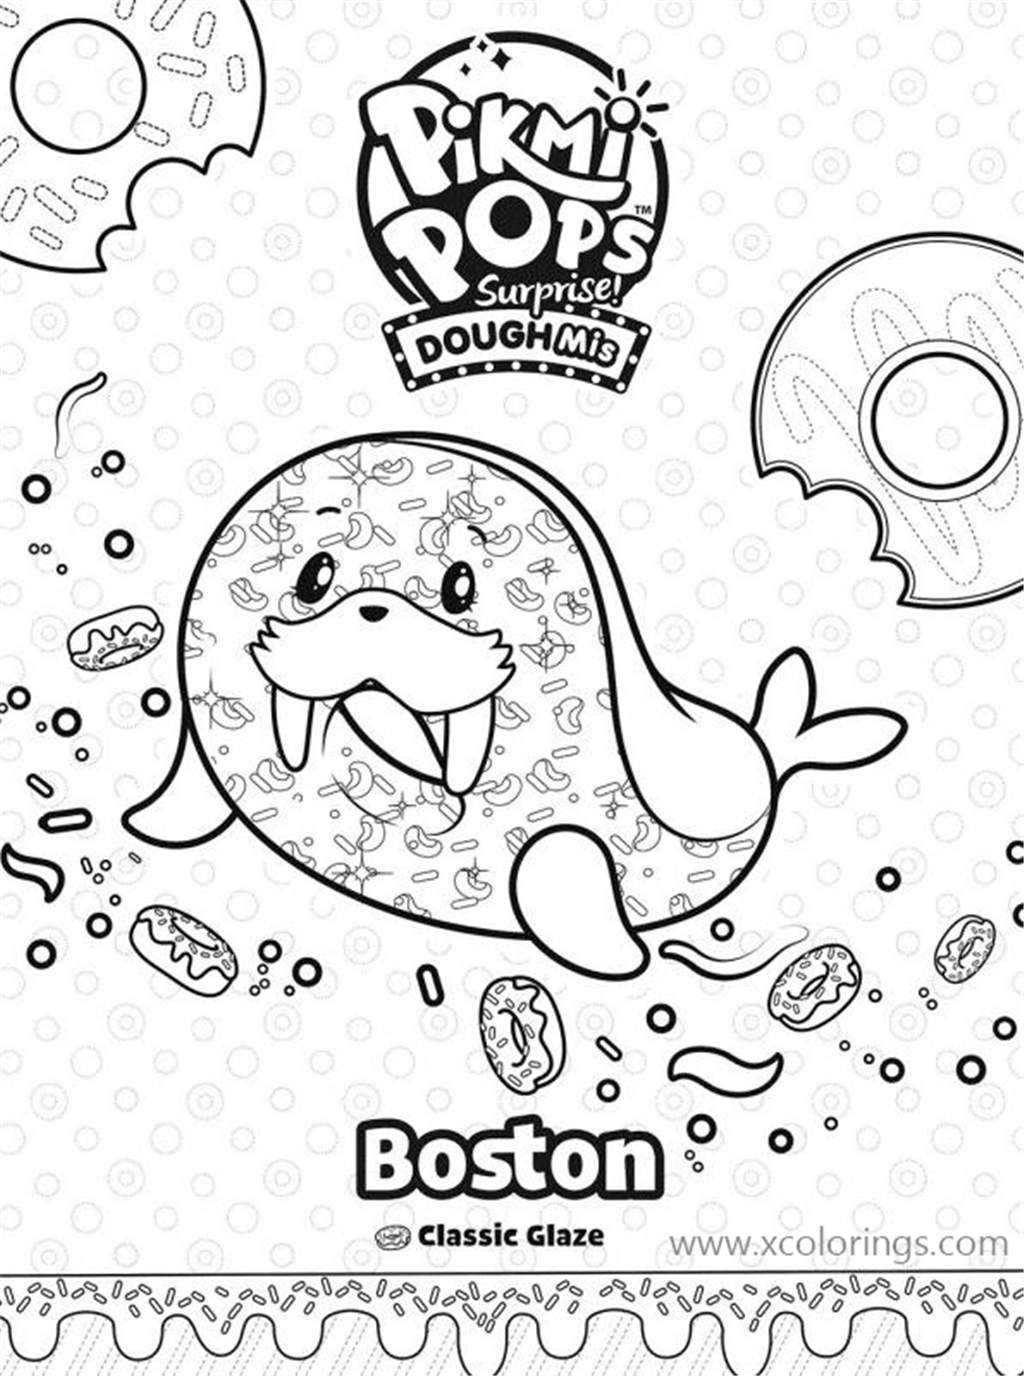 Free Boston from Pikmi Pops Coloring Pages printable